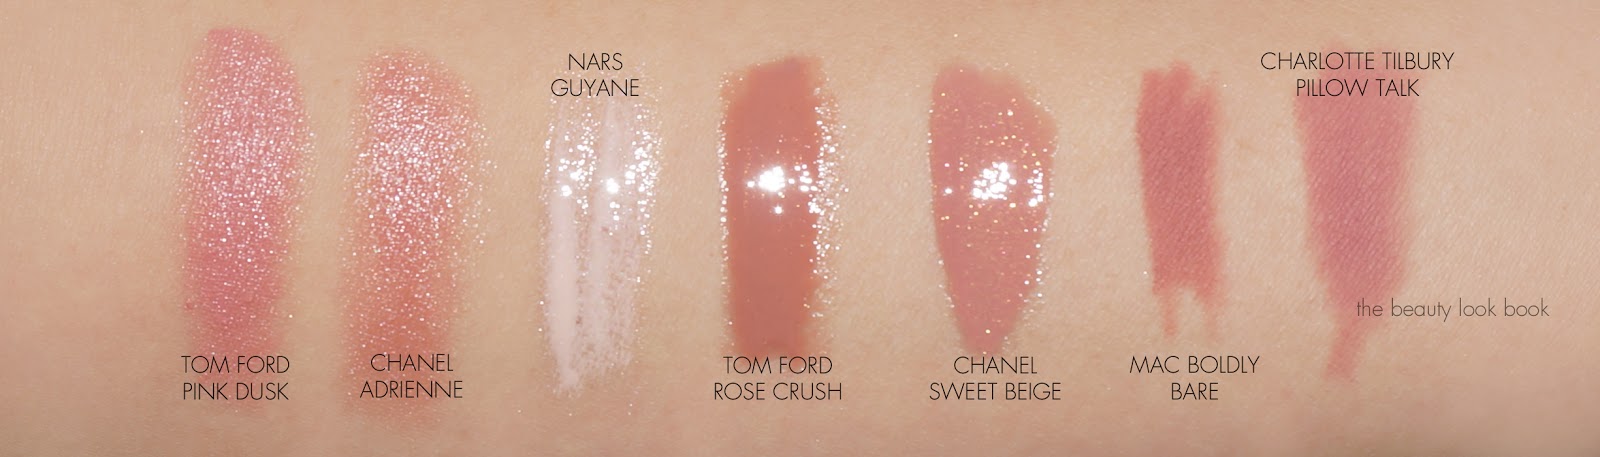 Lippie Loves #2: Chanel Rouge Coco Lipgloss 